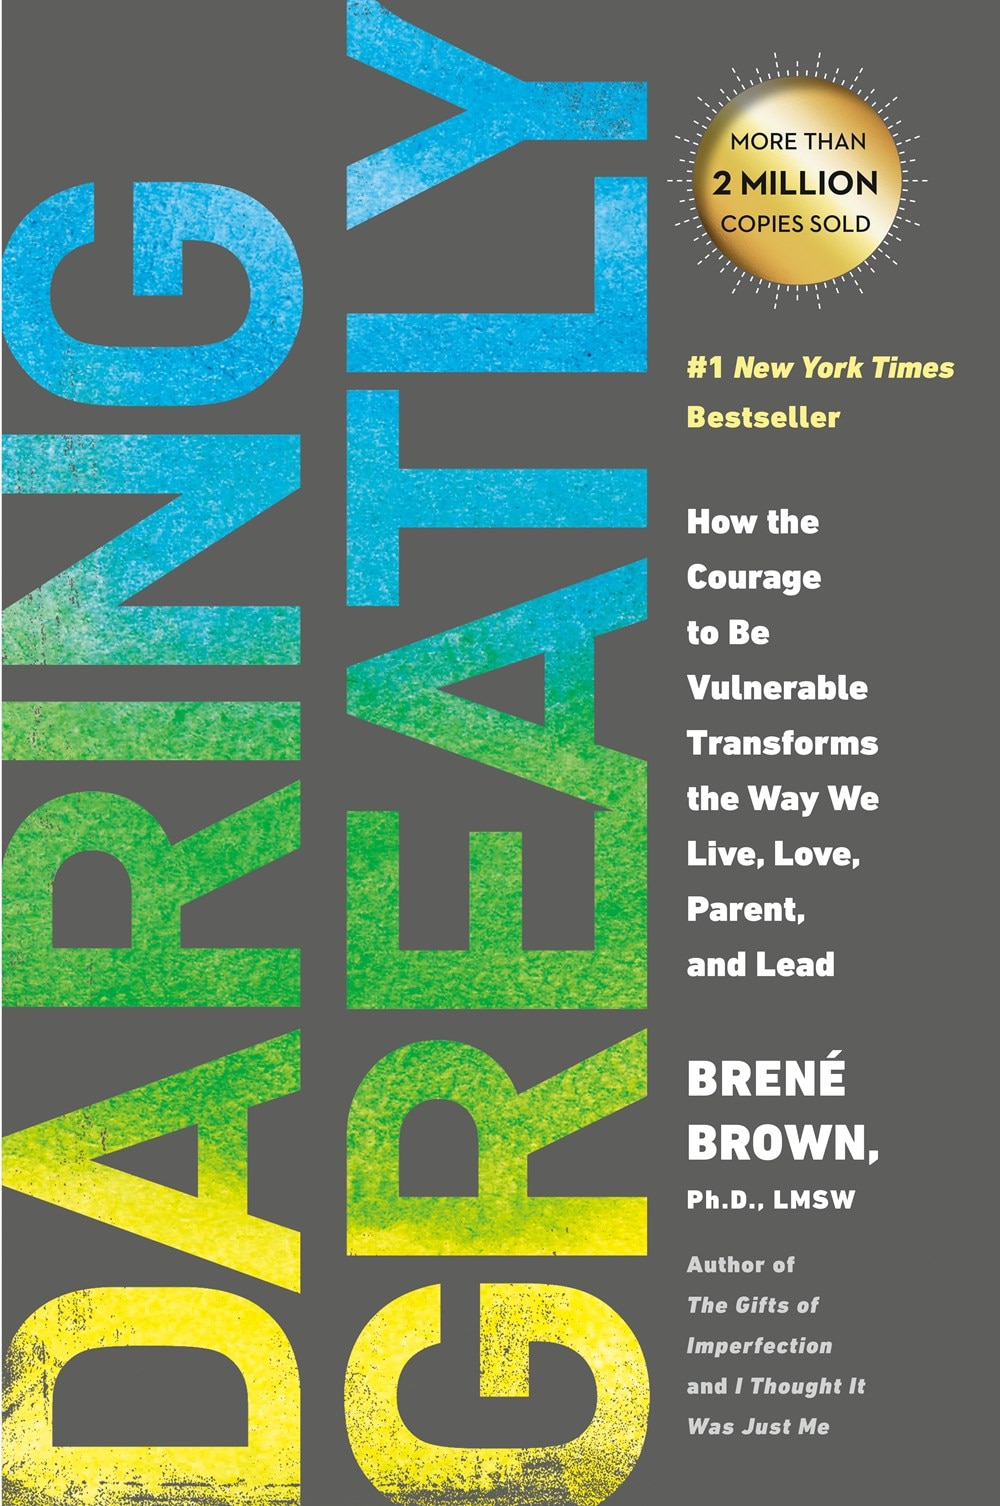 Daring Greatly: How the Courage to Be Vulnerable Transforms the Way We Live  Love  Parent  and Lead